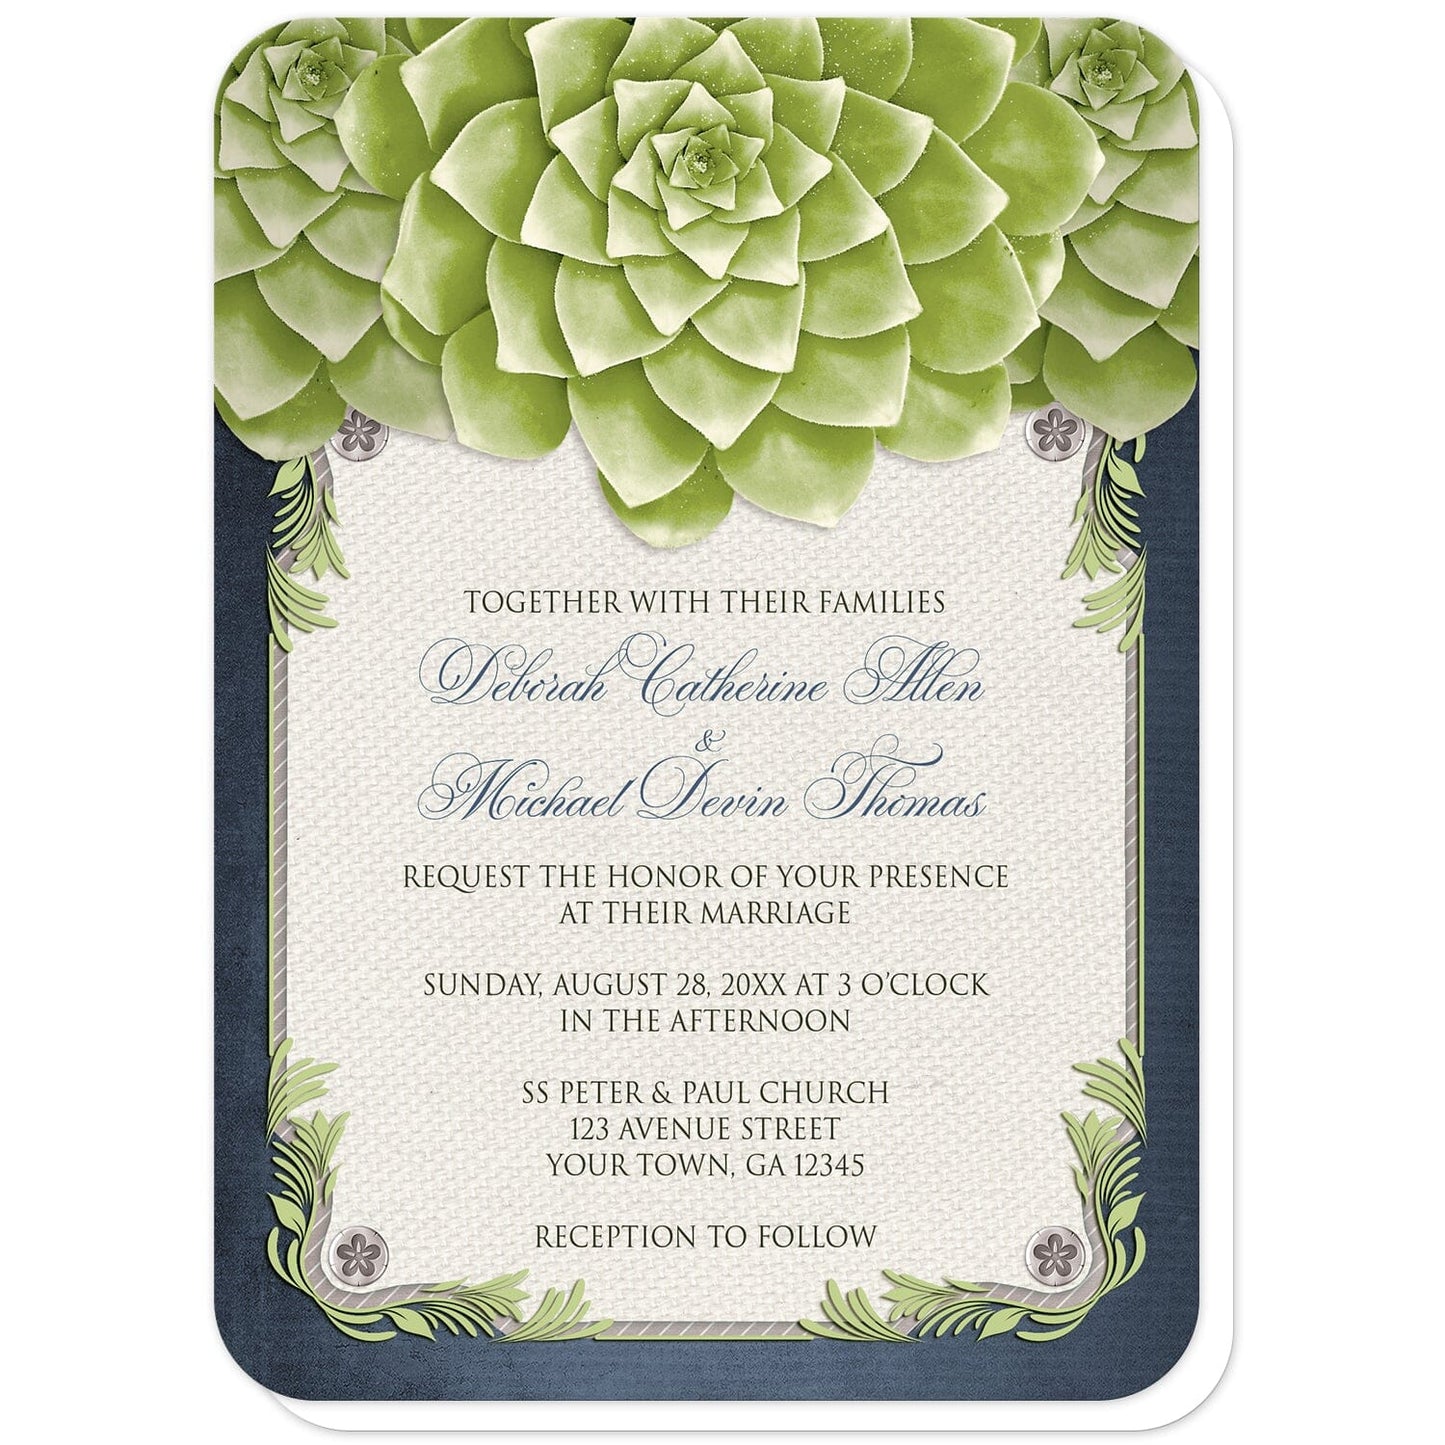 Rustic Succulent Garden Navy Wedding Invitations (with rounded corners) at Artistically Invited. Invites with three large and lovely green succulents along the top over a beige canvas illustration framed with a leafy green decorative border, striped gray, and four floral metal pin illustrations, all over a navy blue background along the edges. Your personalized marriage celebration details are custom printed in dark gray and navy blue over the beige canvas background in the center area below the succulents.